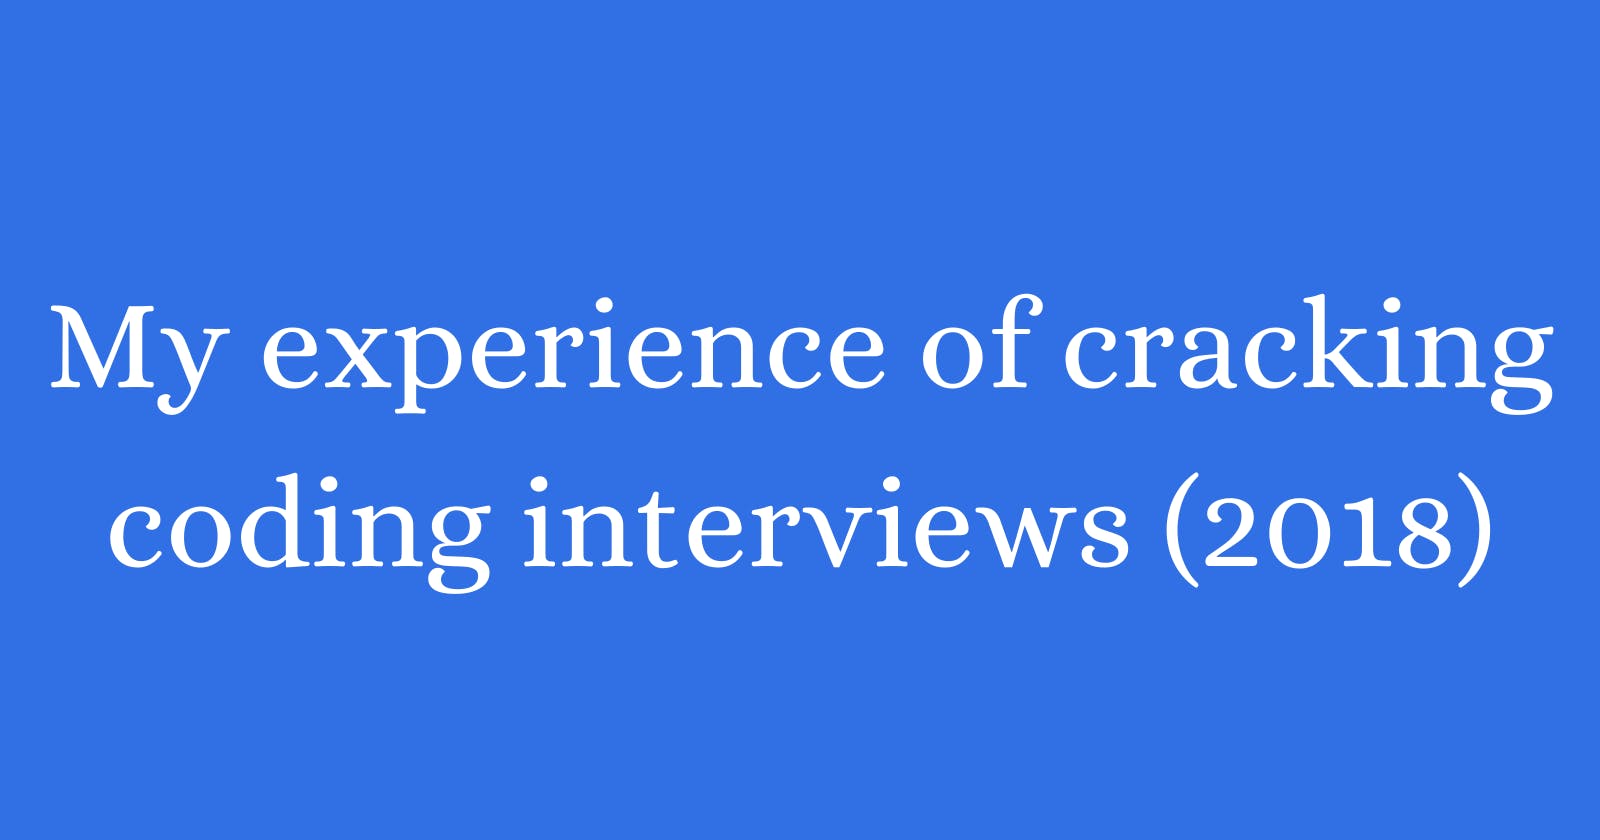 My experience of cracking coding interviews (2018)